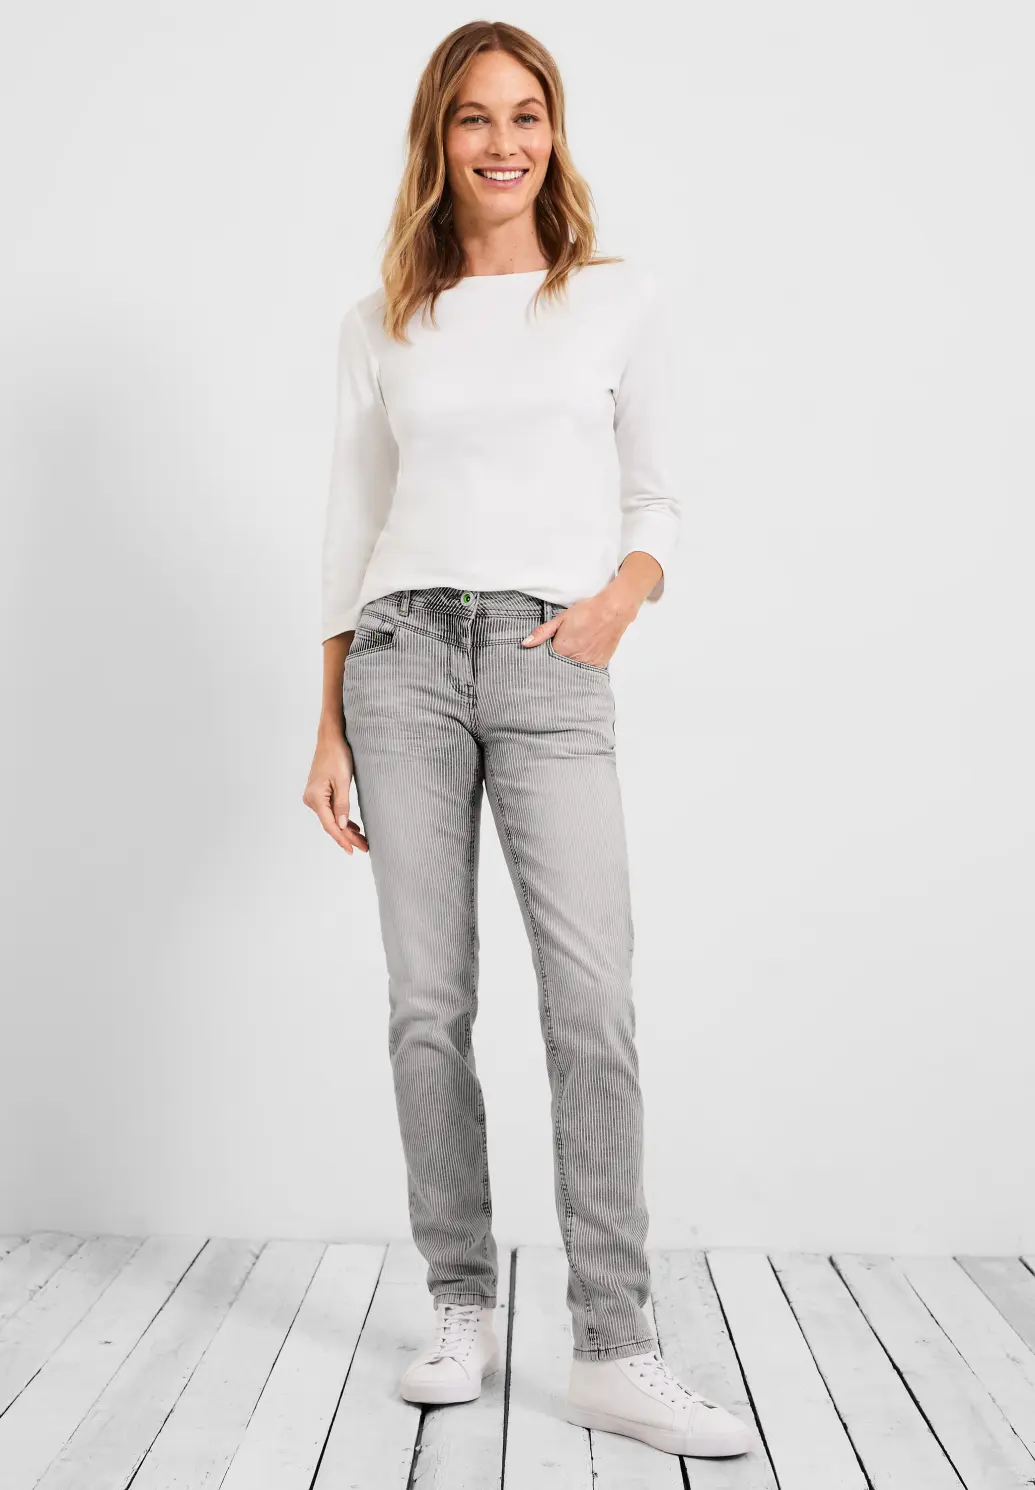 Used Fit Blues | Scarlett - Jeans Stripes Wash with - Grey CECIL Cotton Loose